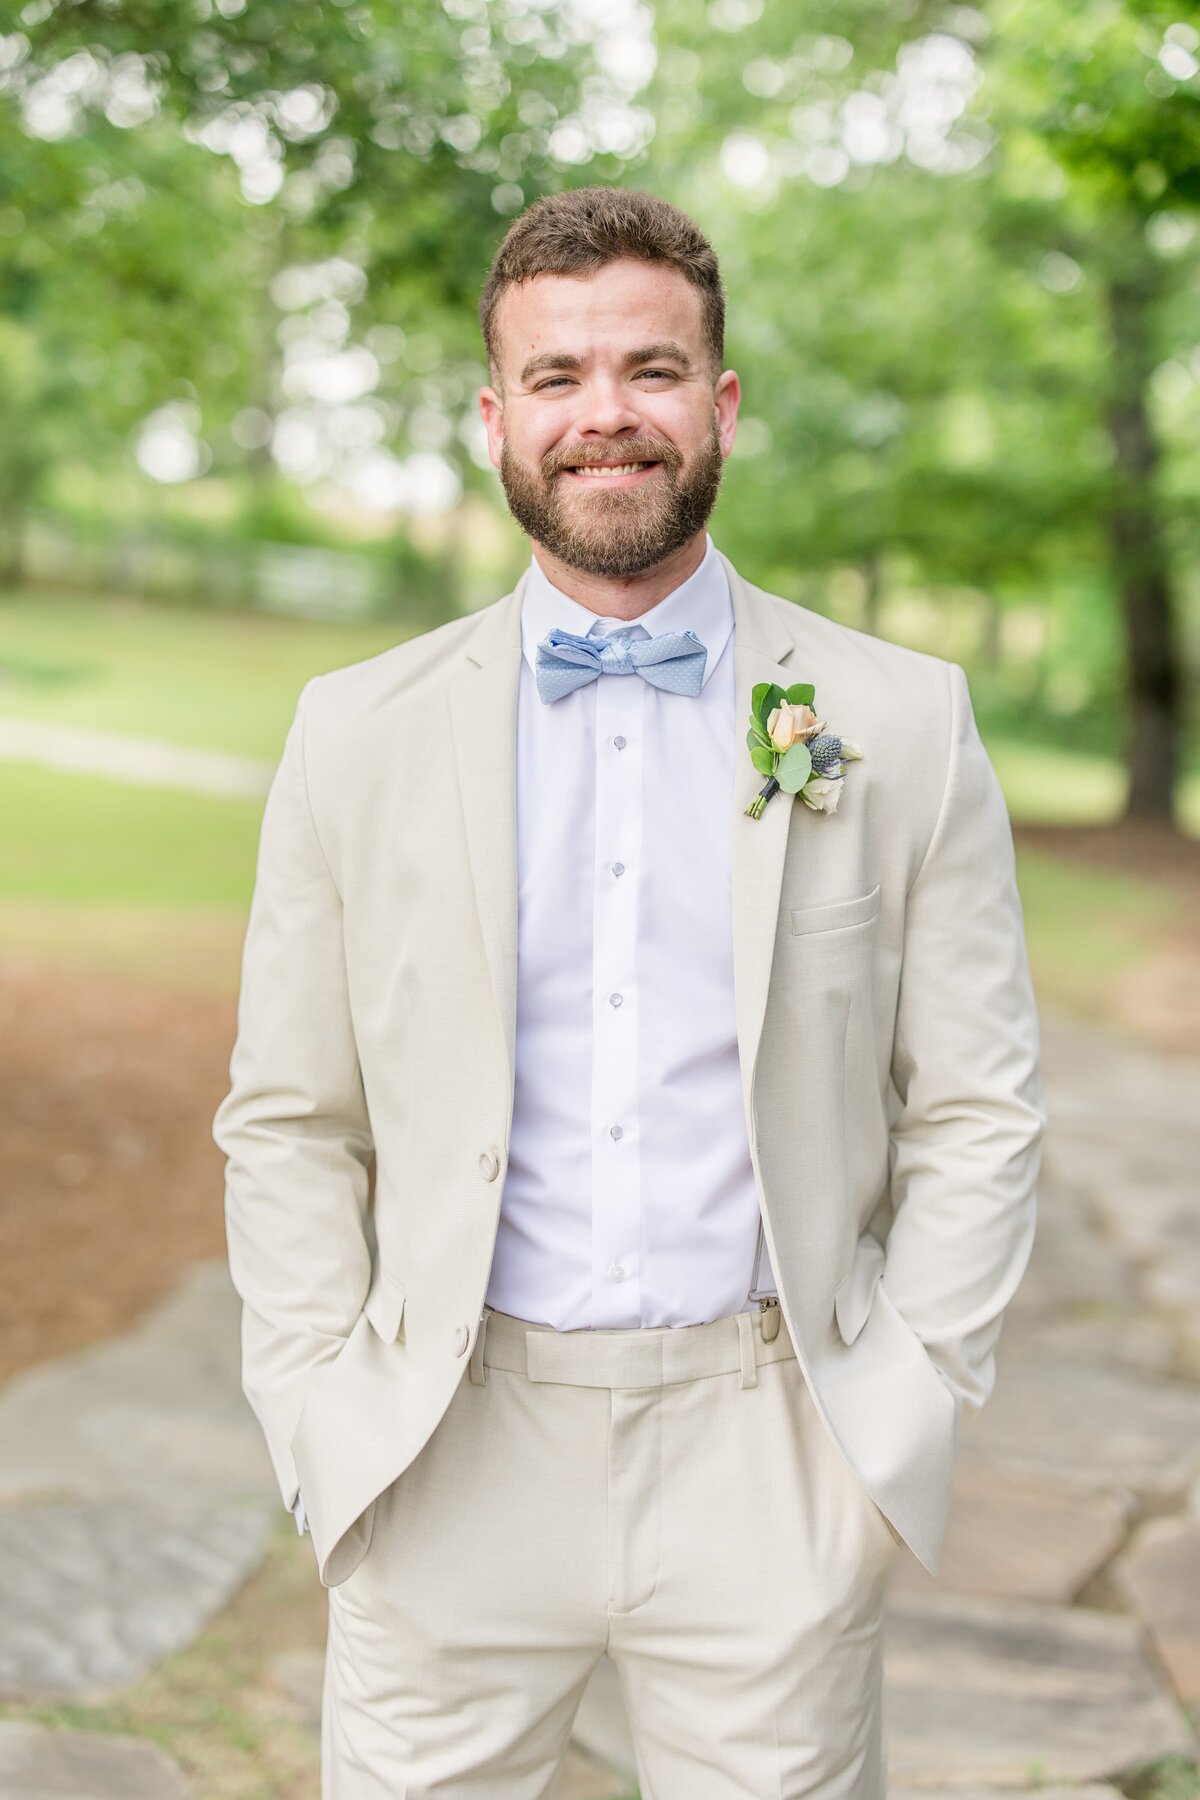 katie_and_alec_wedding_photography_wedding_videography_birmingham_alabama_husband_and_wife_team_photo_video_weddings_engagement_engagements_light_airy_focused_on_marriage__barn_at_shady_lane_wedding_72